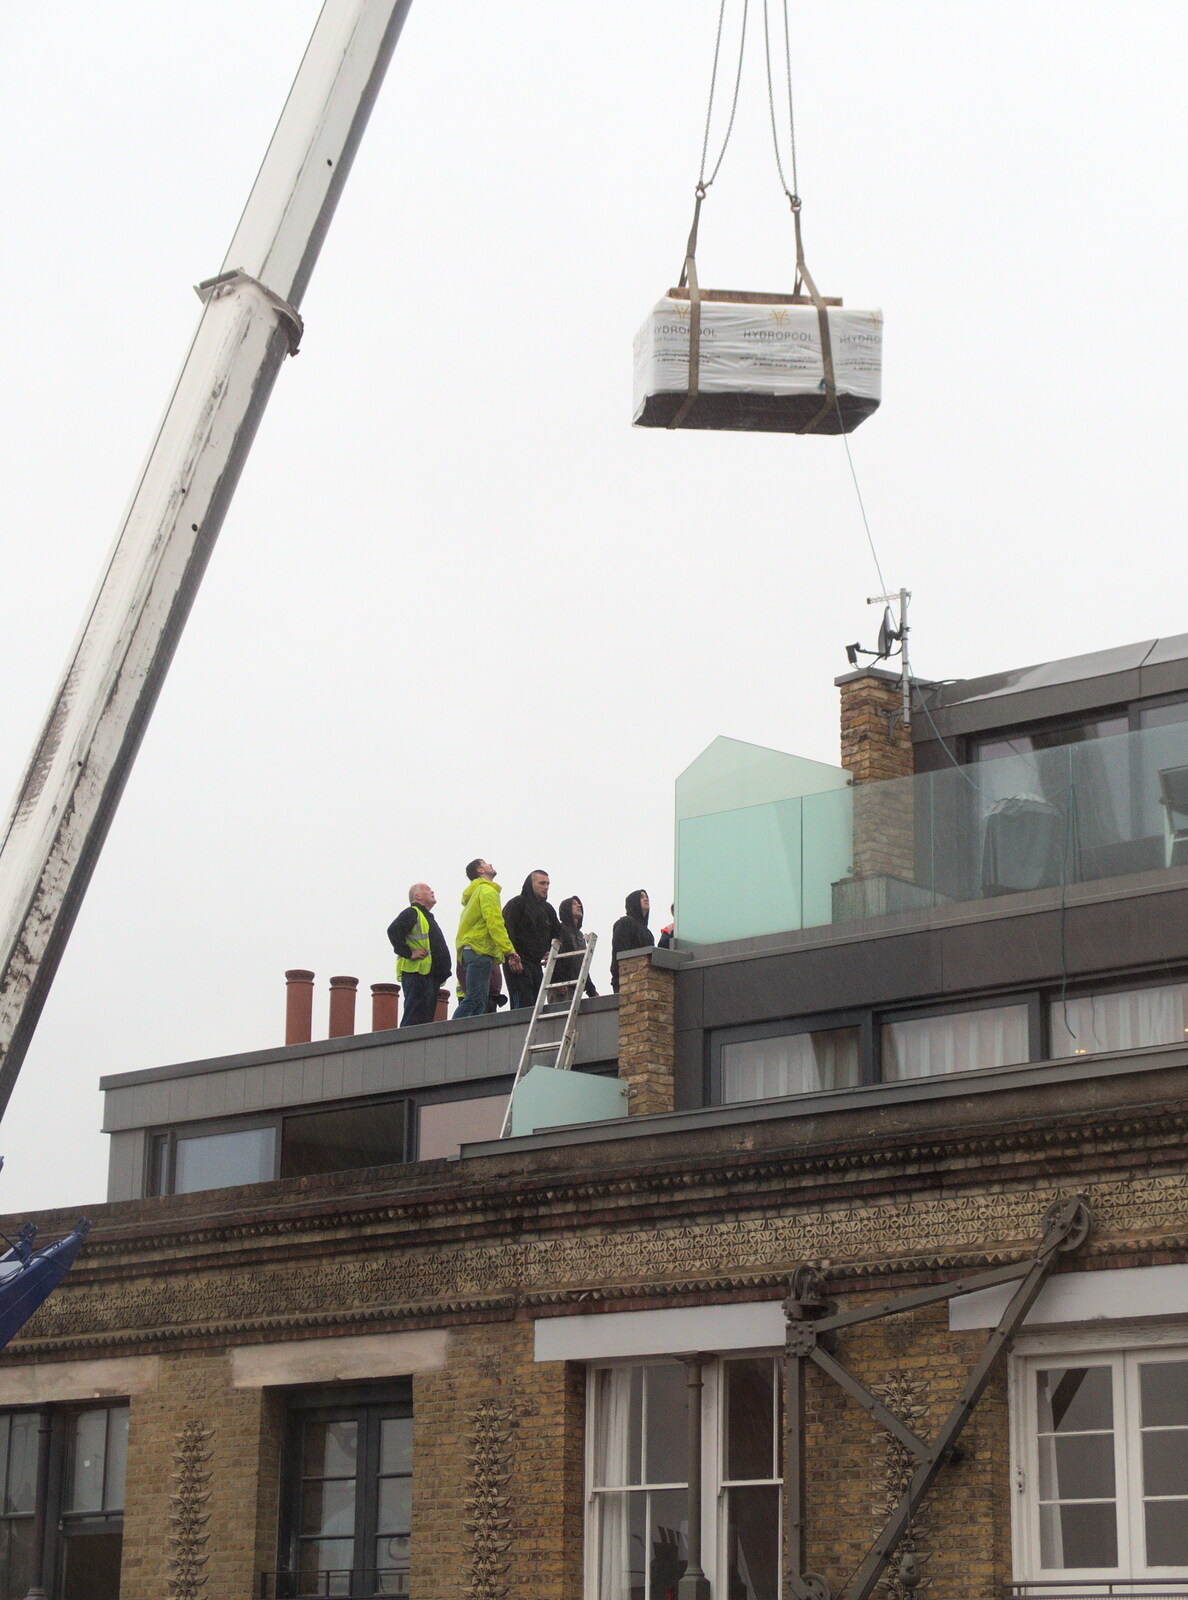 The tub is lowered into position from Hot-tub Penthouse, Thornham Walks, and Building, London and Suffolk - 12th November 2015